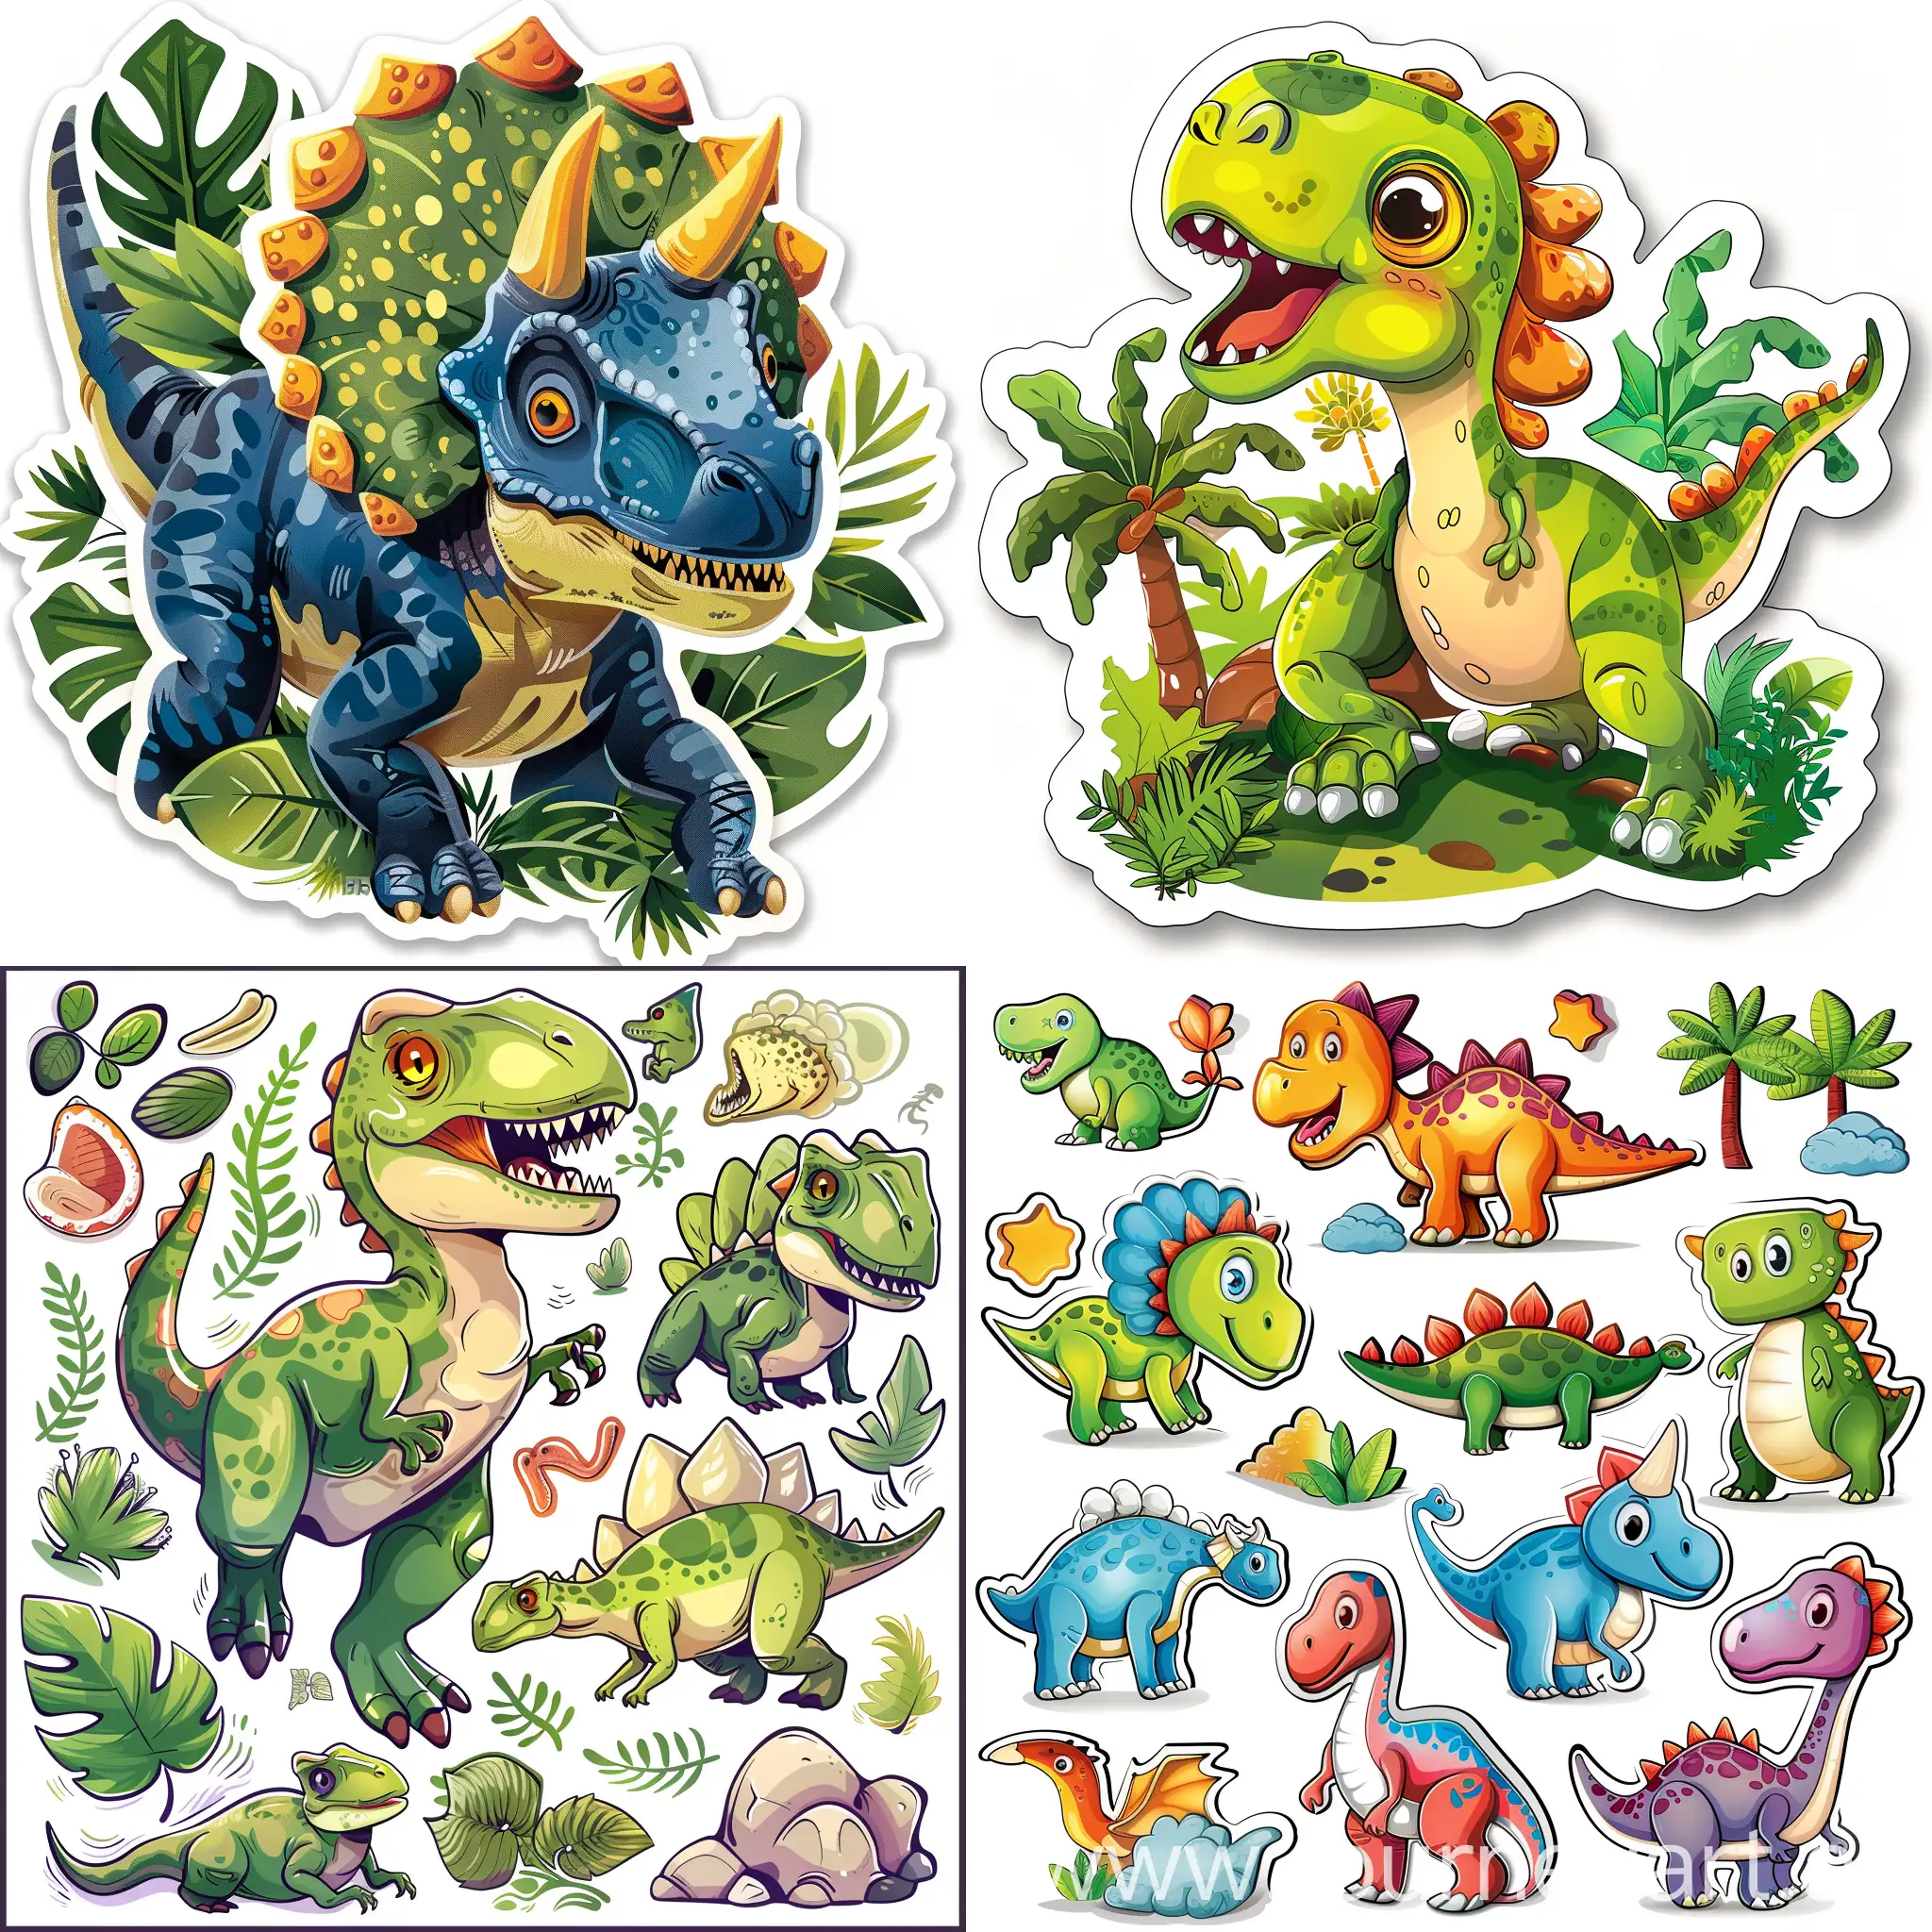 Colorful-Cartoon-Dinosaurs-on-White-Background-for-Sticker-Collection